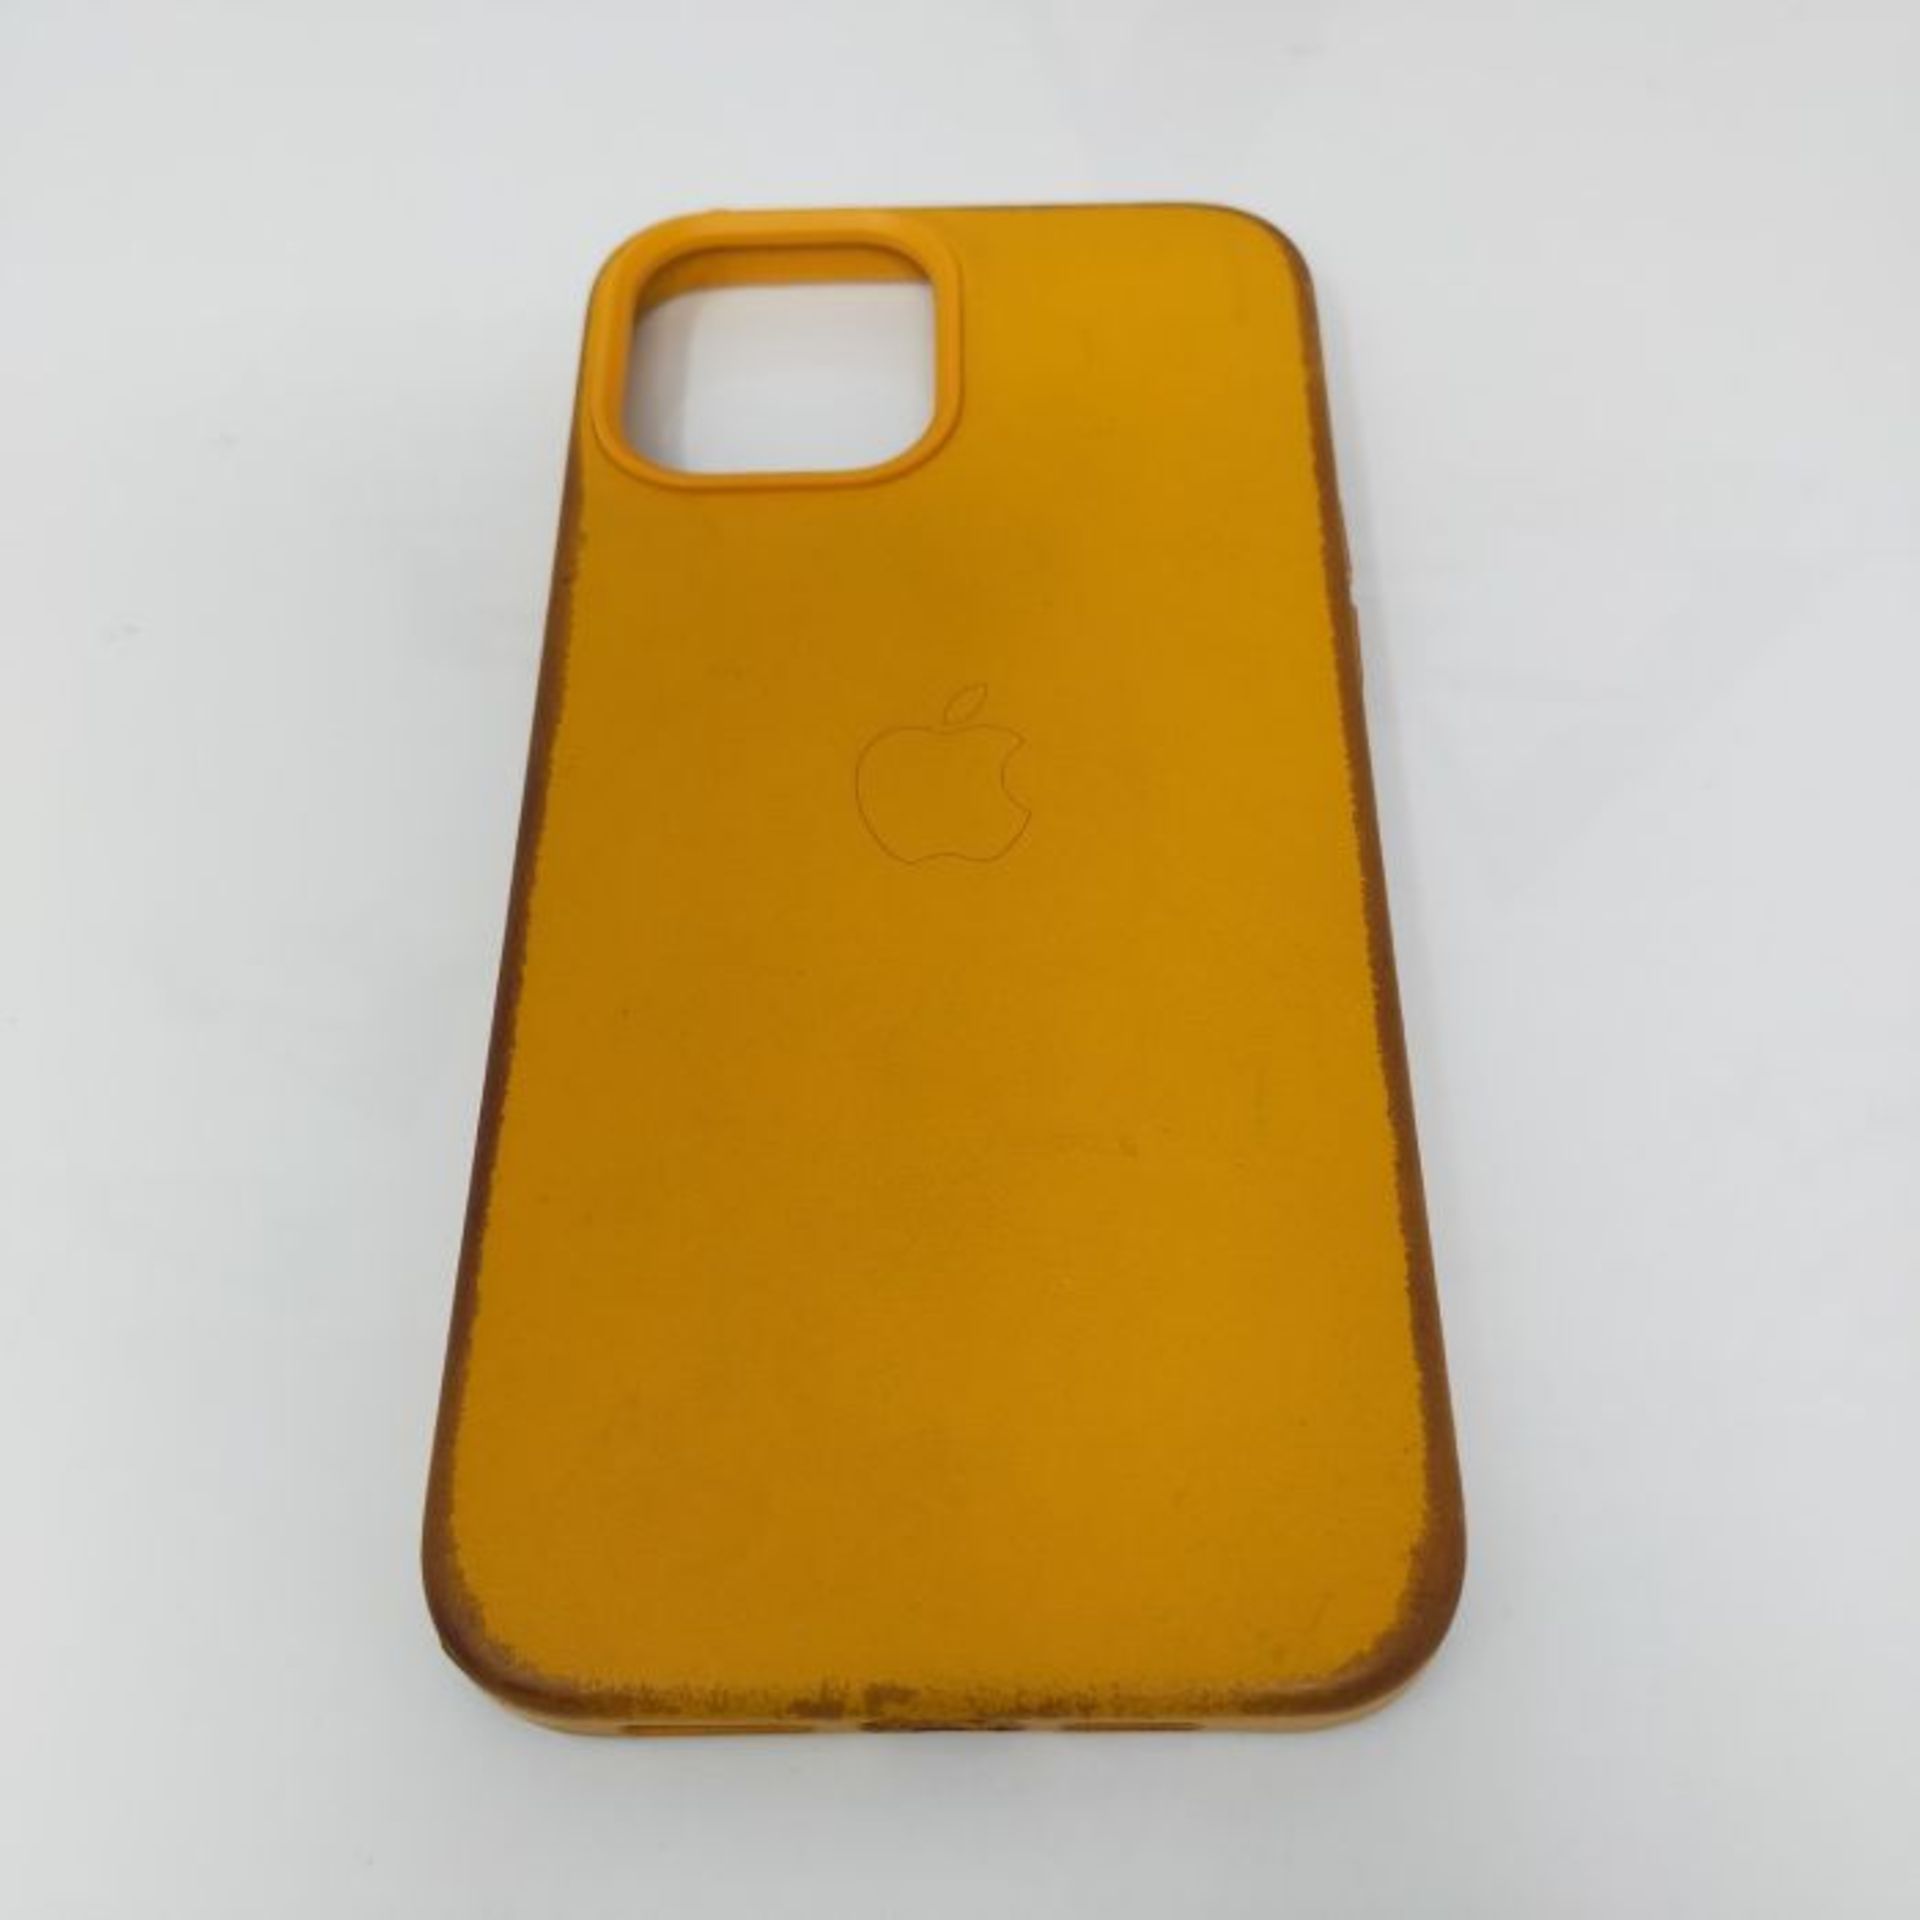 Apple Leather Case with MagSafe (for iPhone 12 Pro Max) - California Poppy - Image 3 of 3